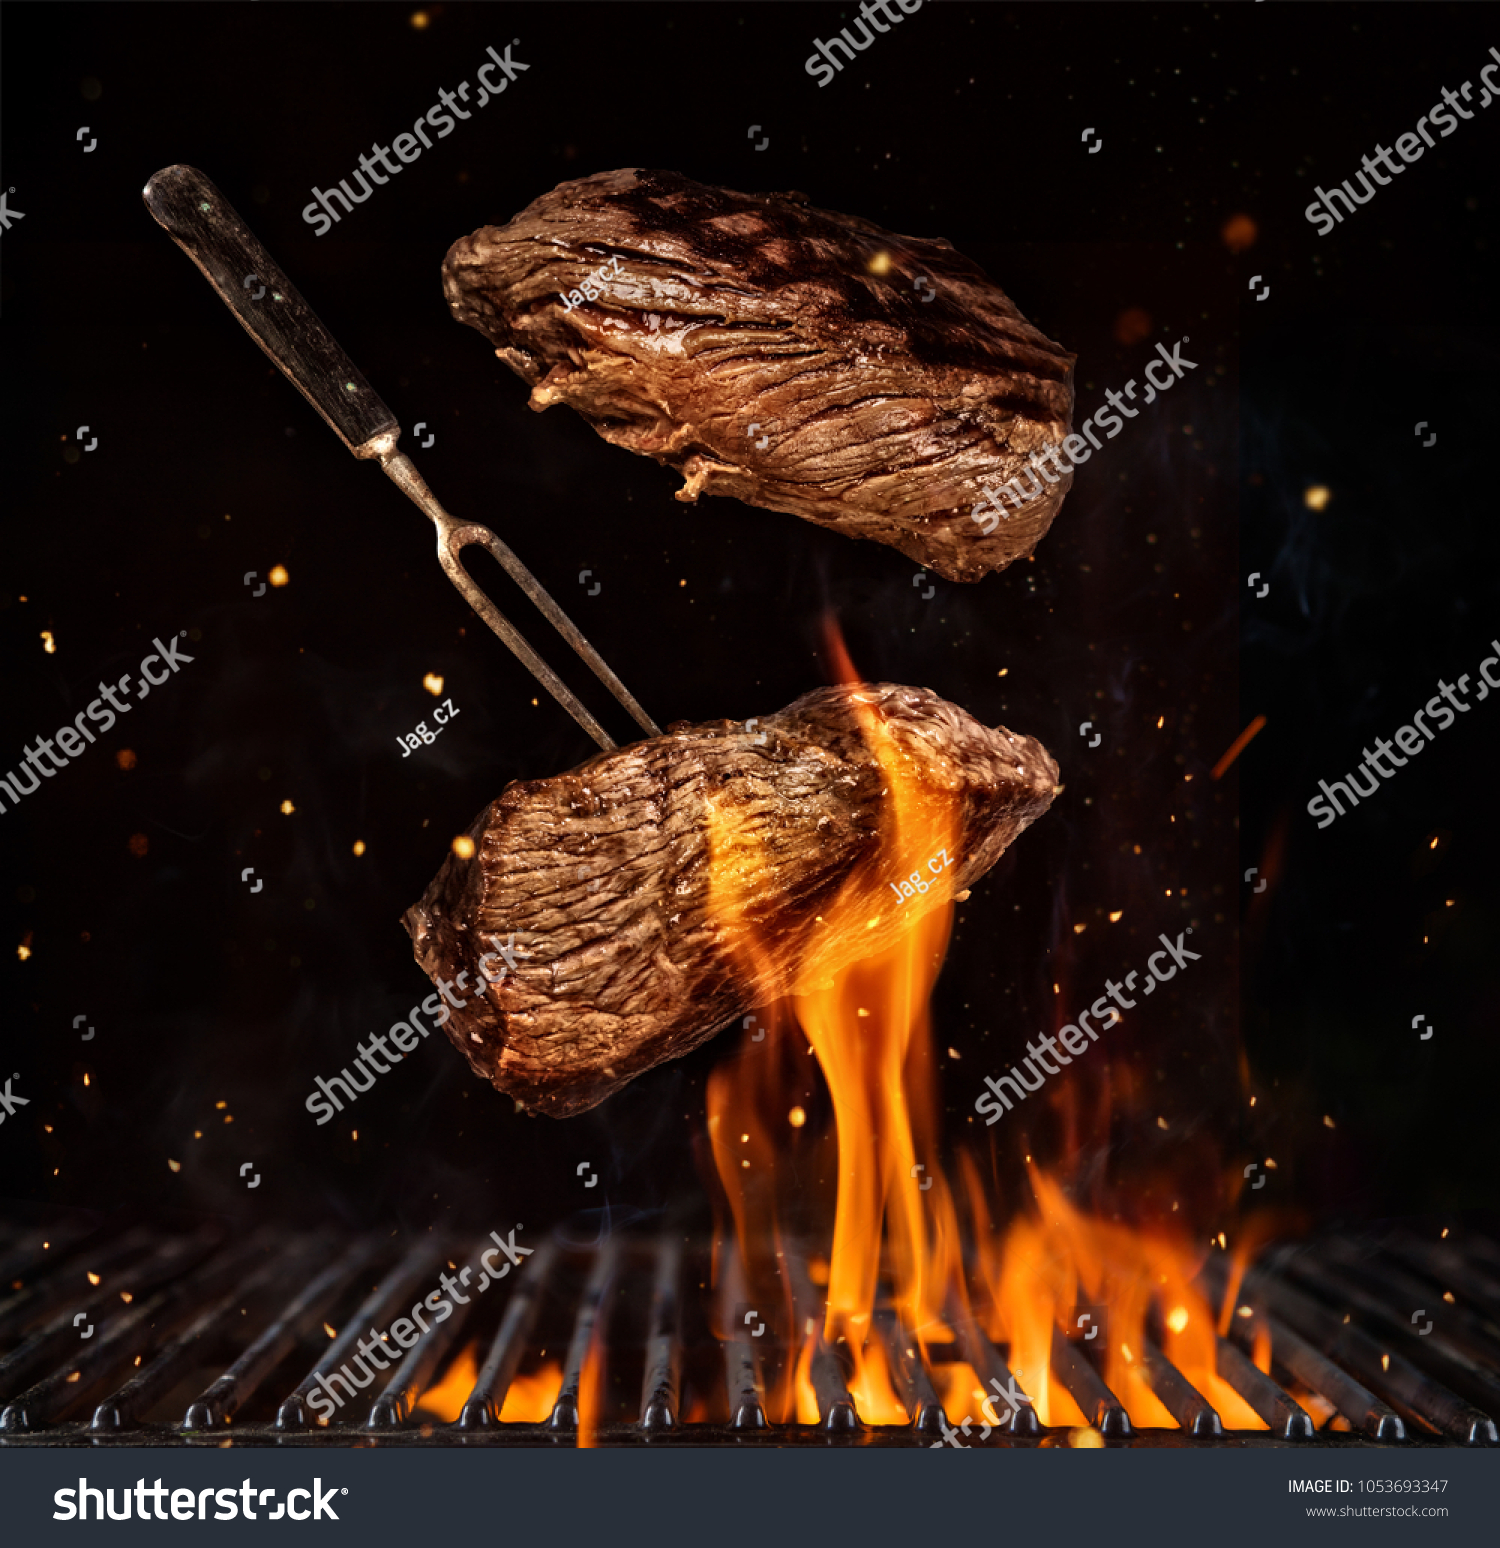 Flying beef steaks over flaming grill grid, isolated on black background. Barbecue and cooking #1053693347